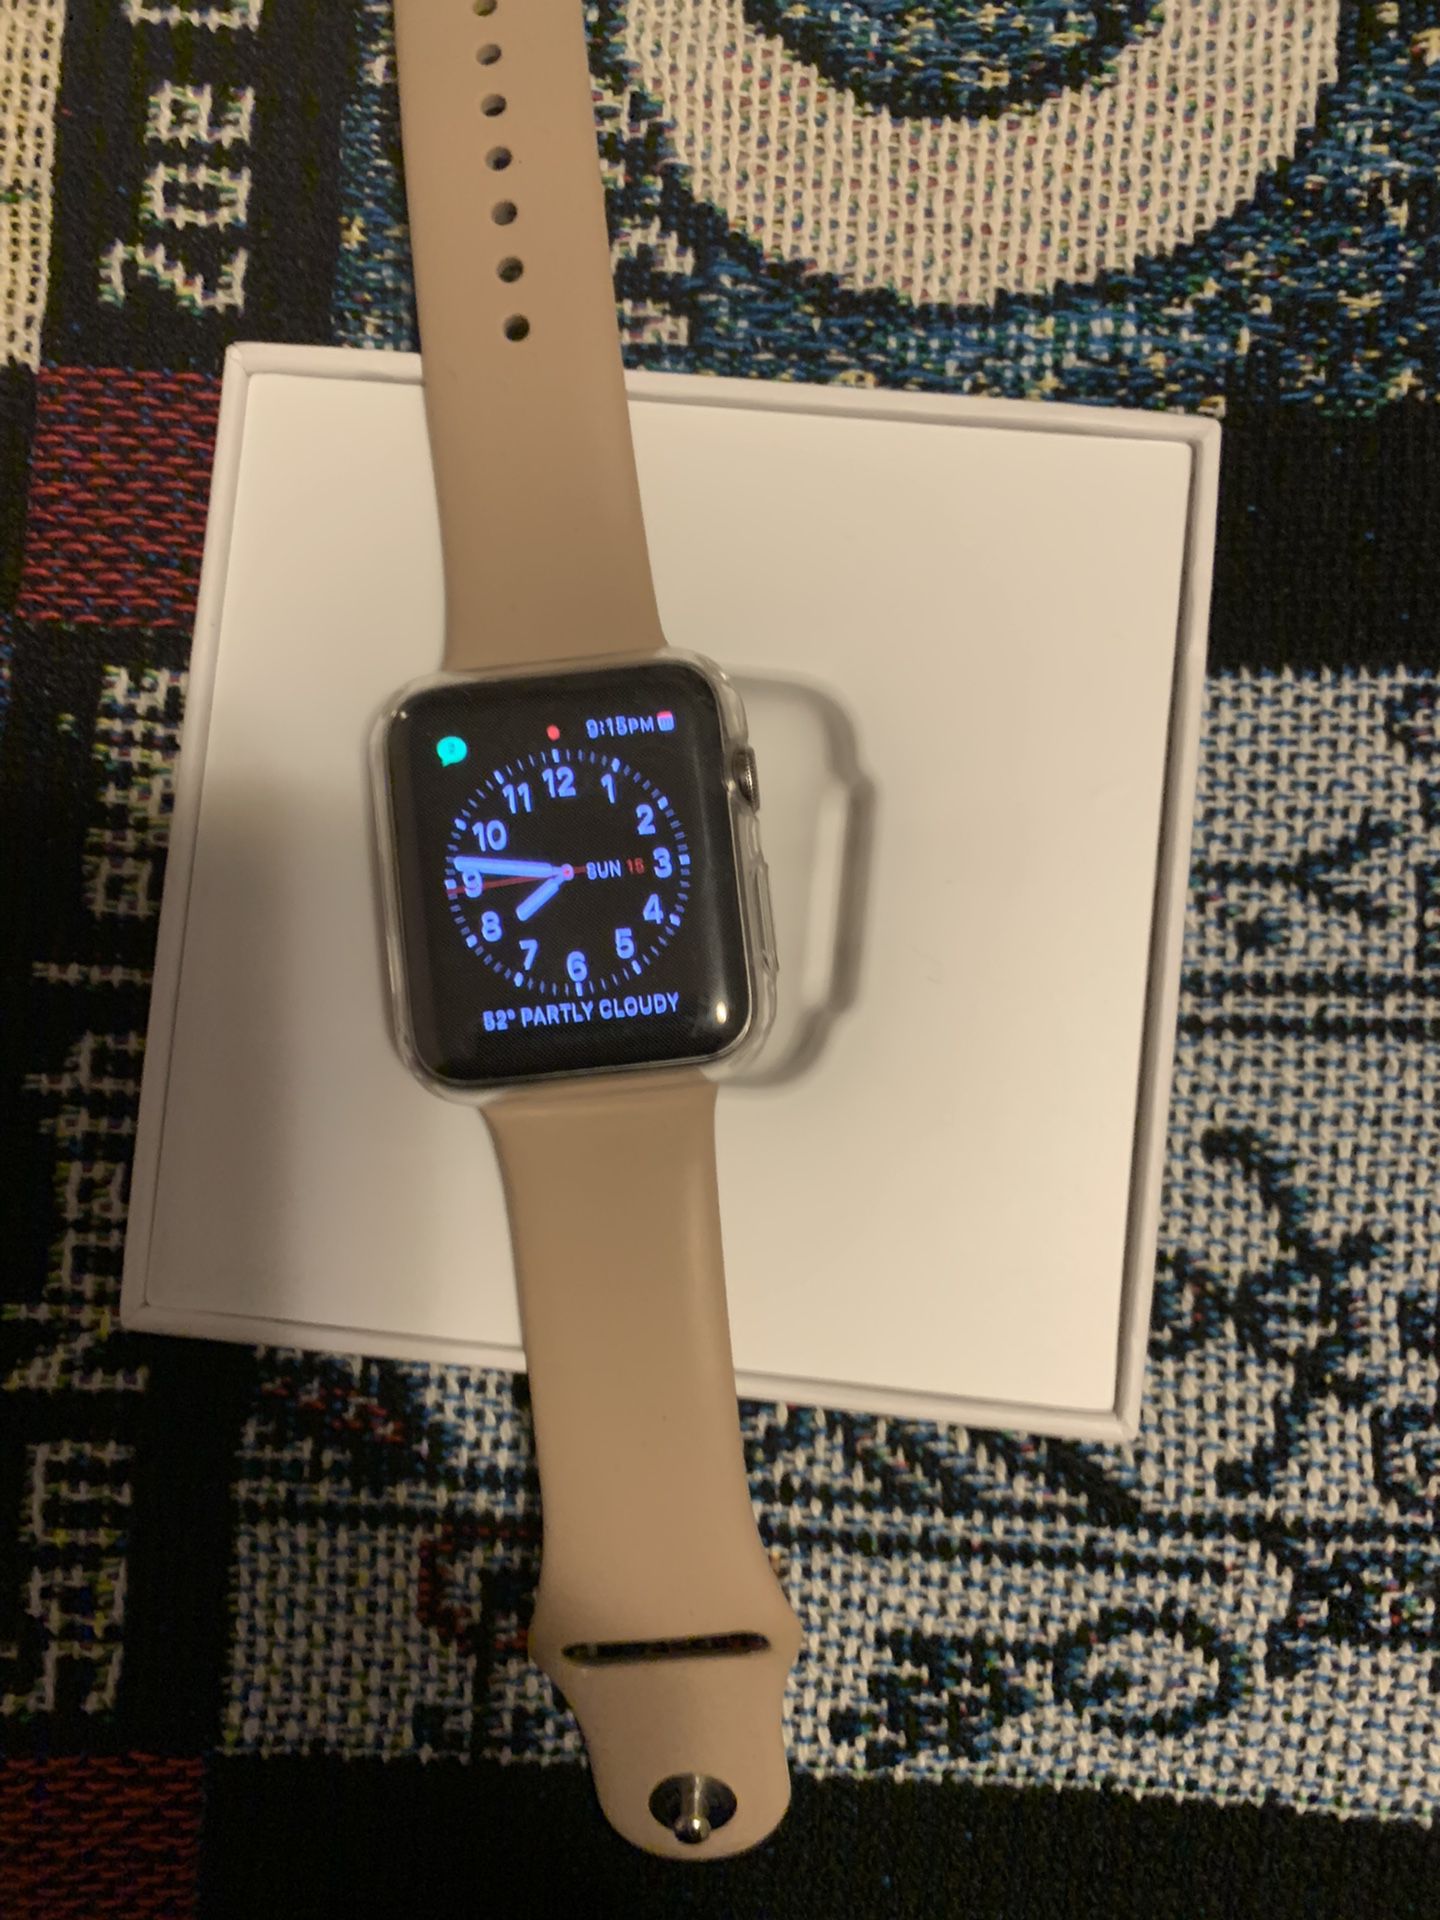 Apple Watch series 2 stainless steel 42mm Spotless No ding/scratches Almost NEW Charger and screen protector included